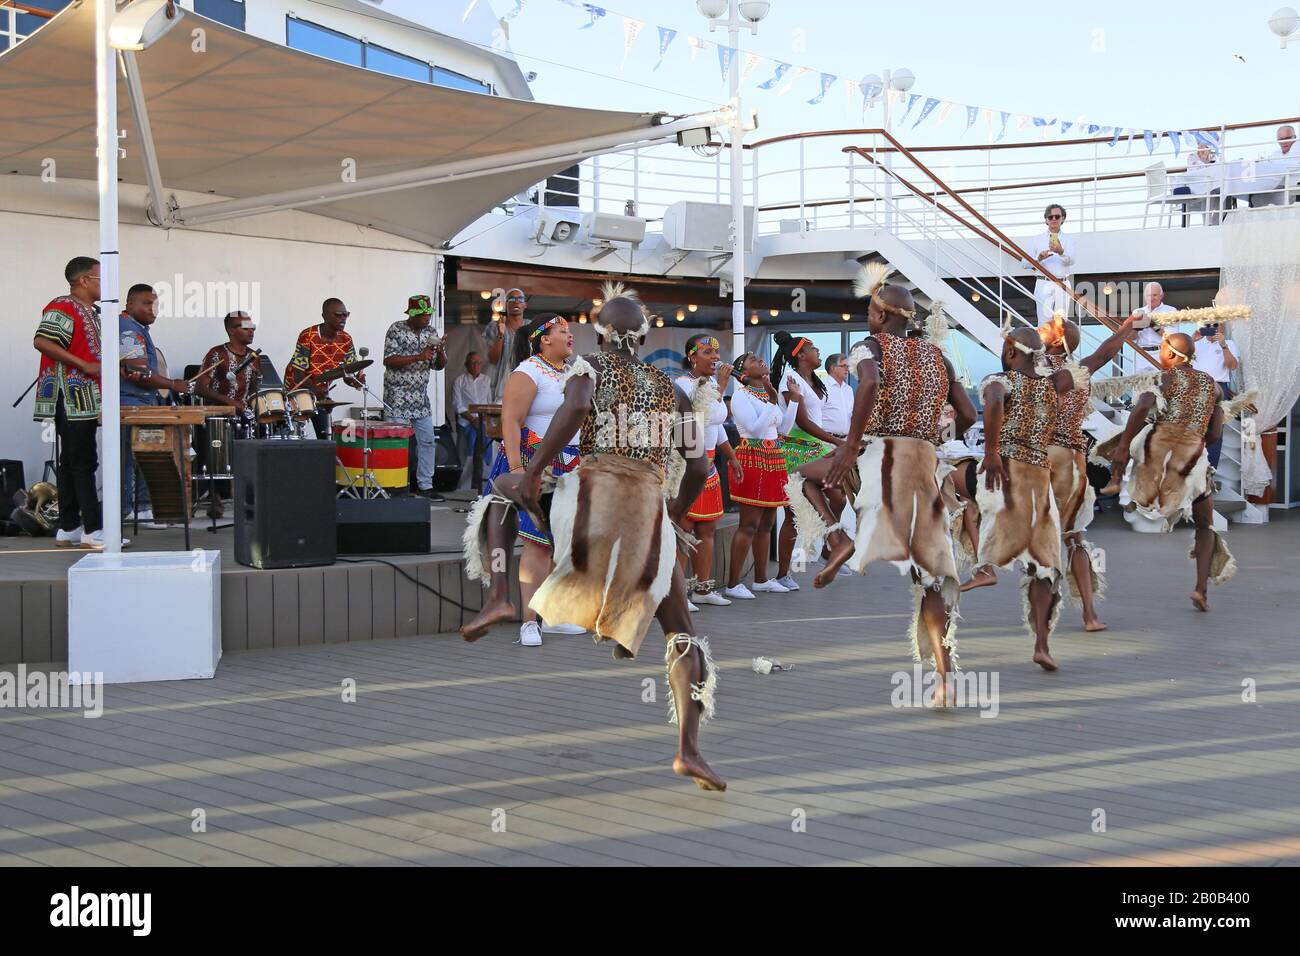 A Zulu cultural group perform for passengers on Azamara Quest cruise ship, Cape Town, Table Bay, Western Cape Province, South Africa, Africa Stock Photo